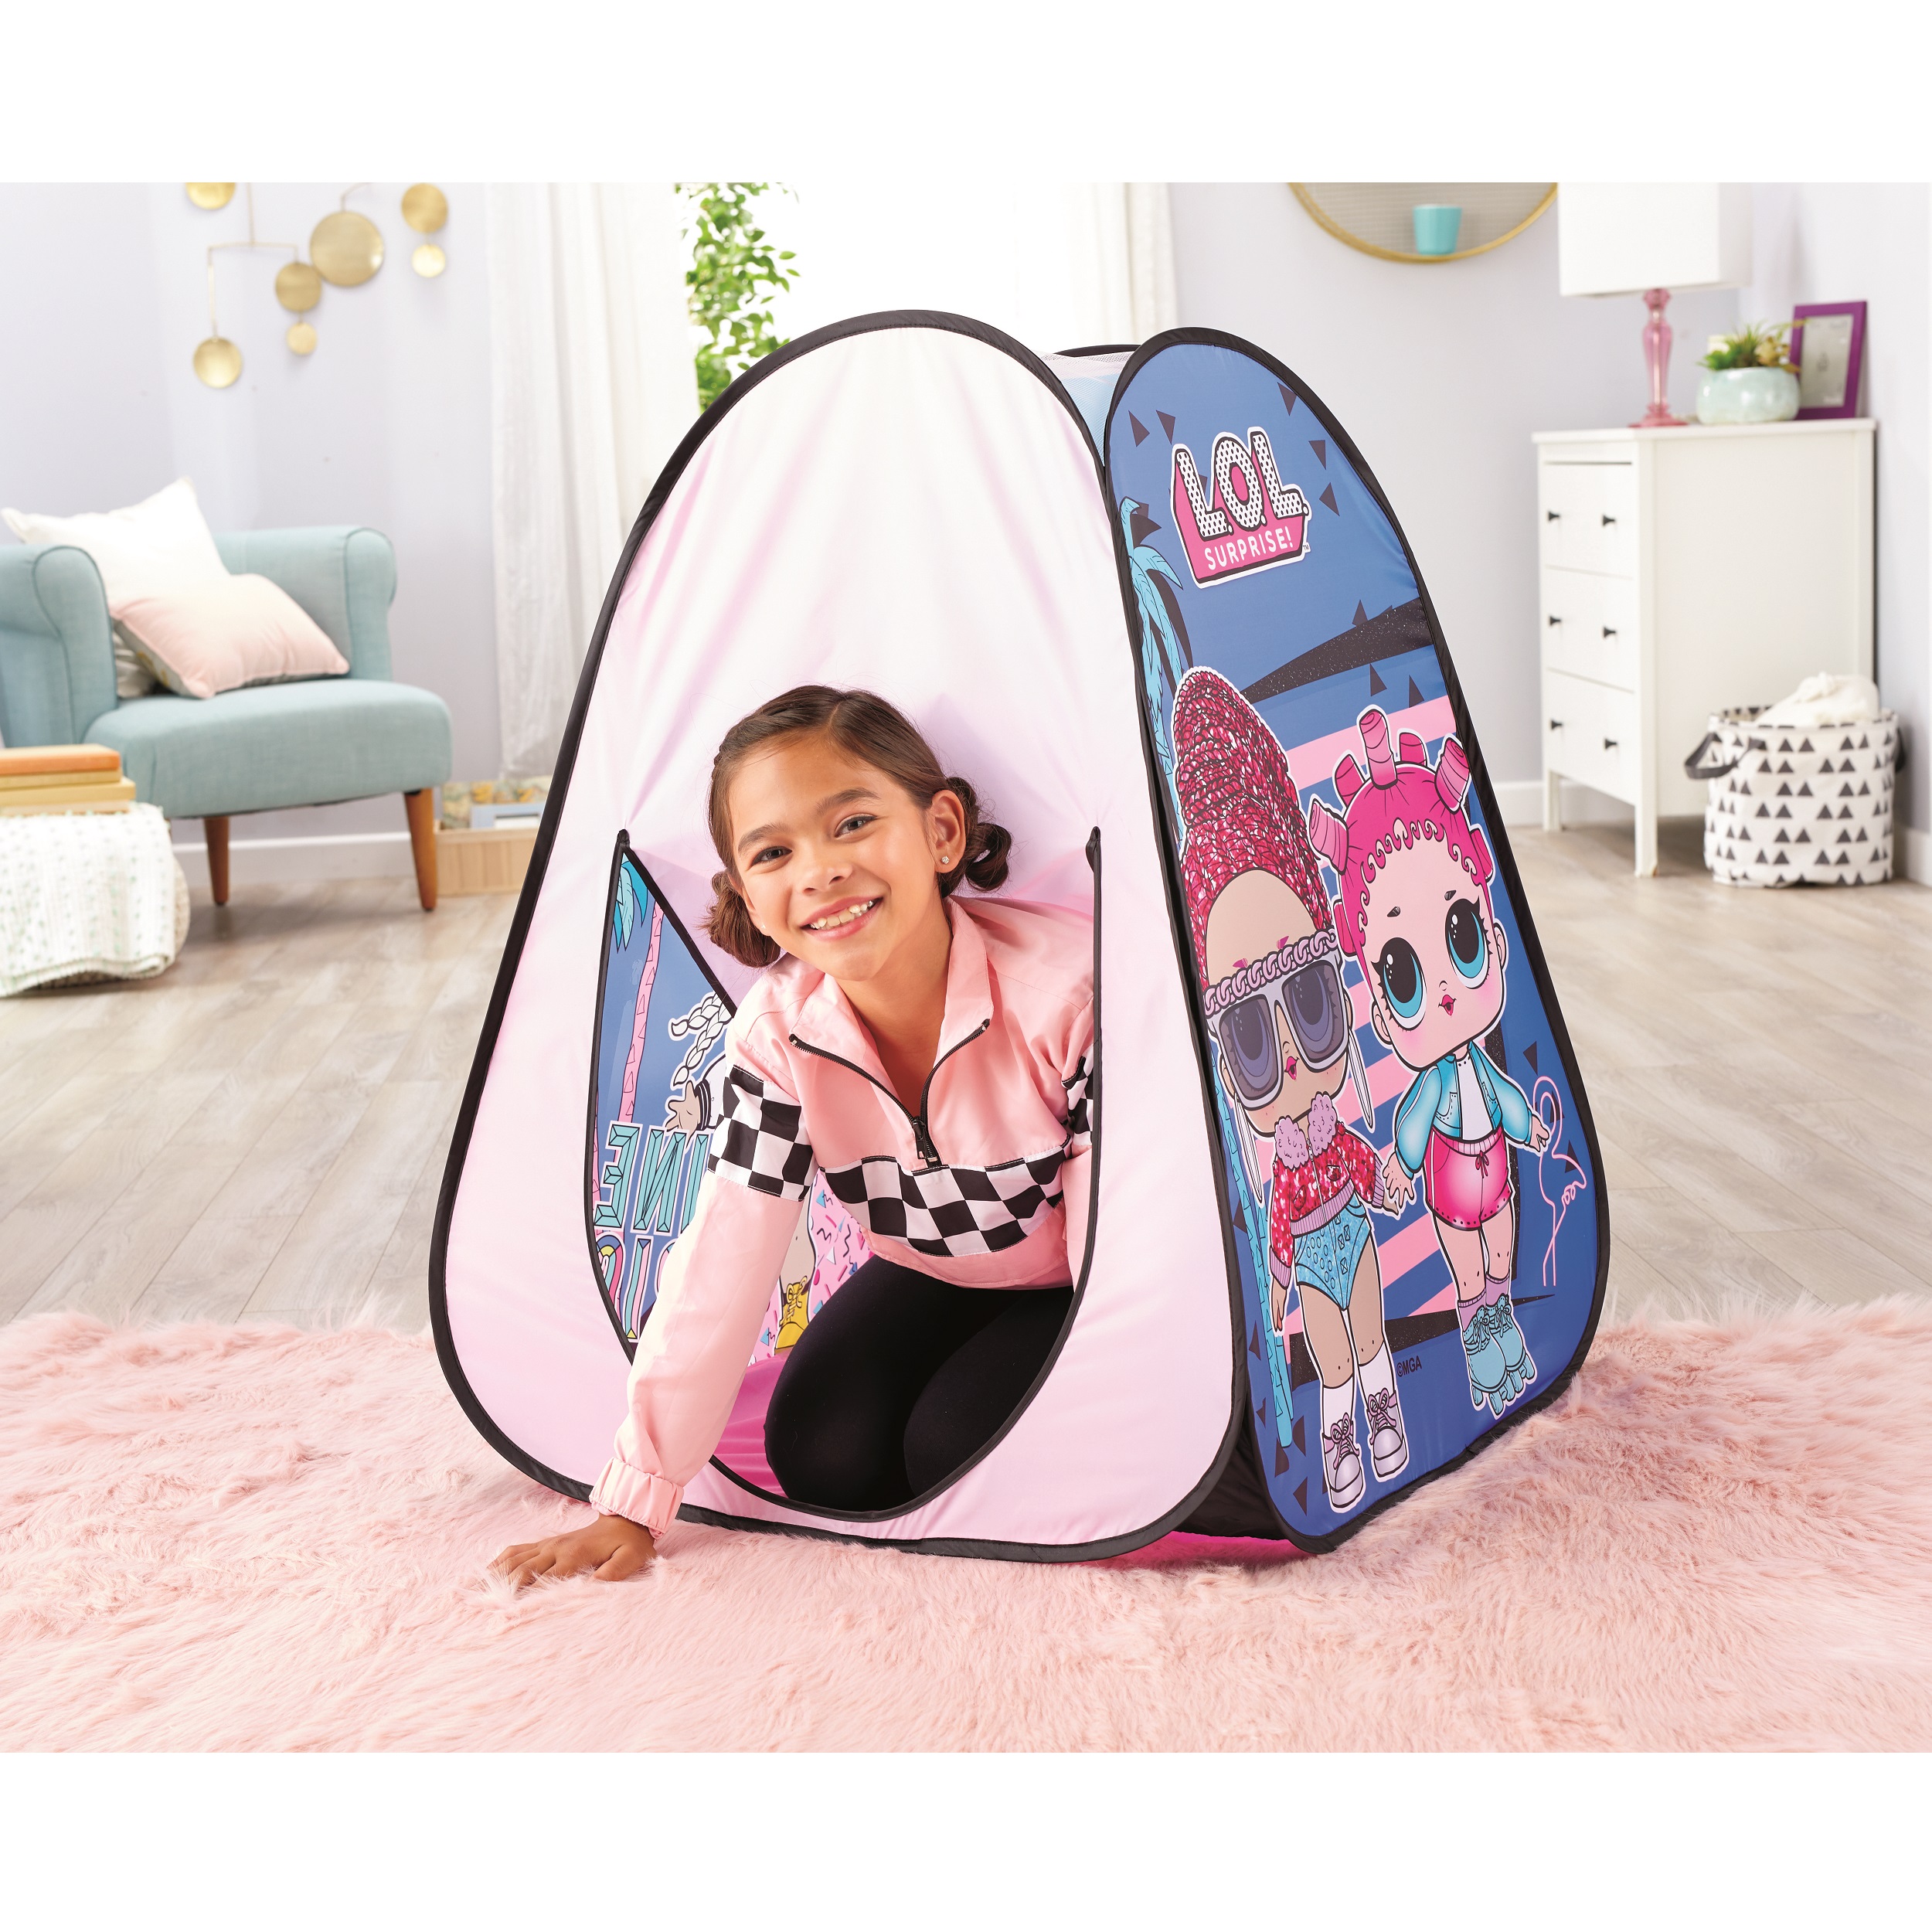 LOL Surprise Indoor/Outdoor Pop-Up Play Tent With Fold-Up Door, Great Gift for Kids Ages 4 5 6+ - image 3 of 6